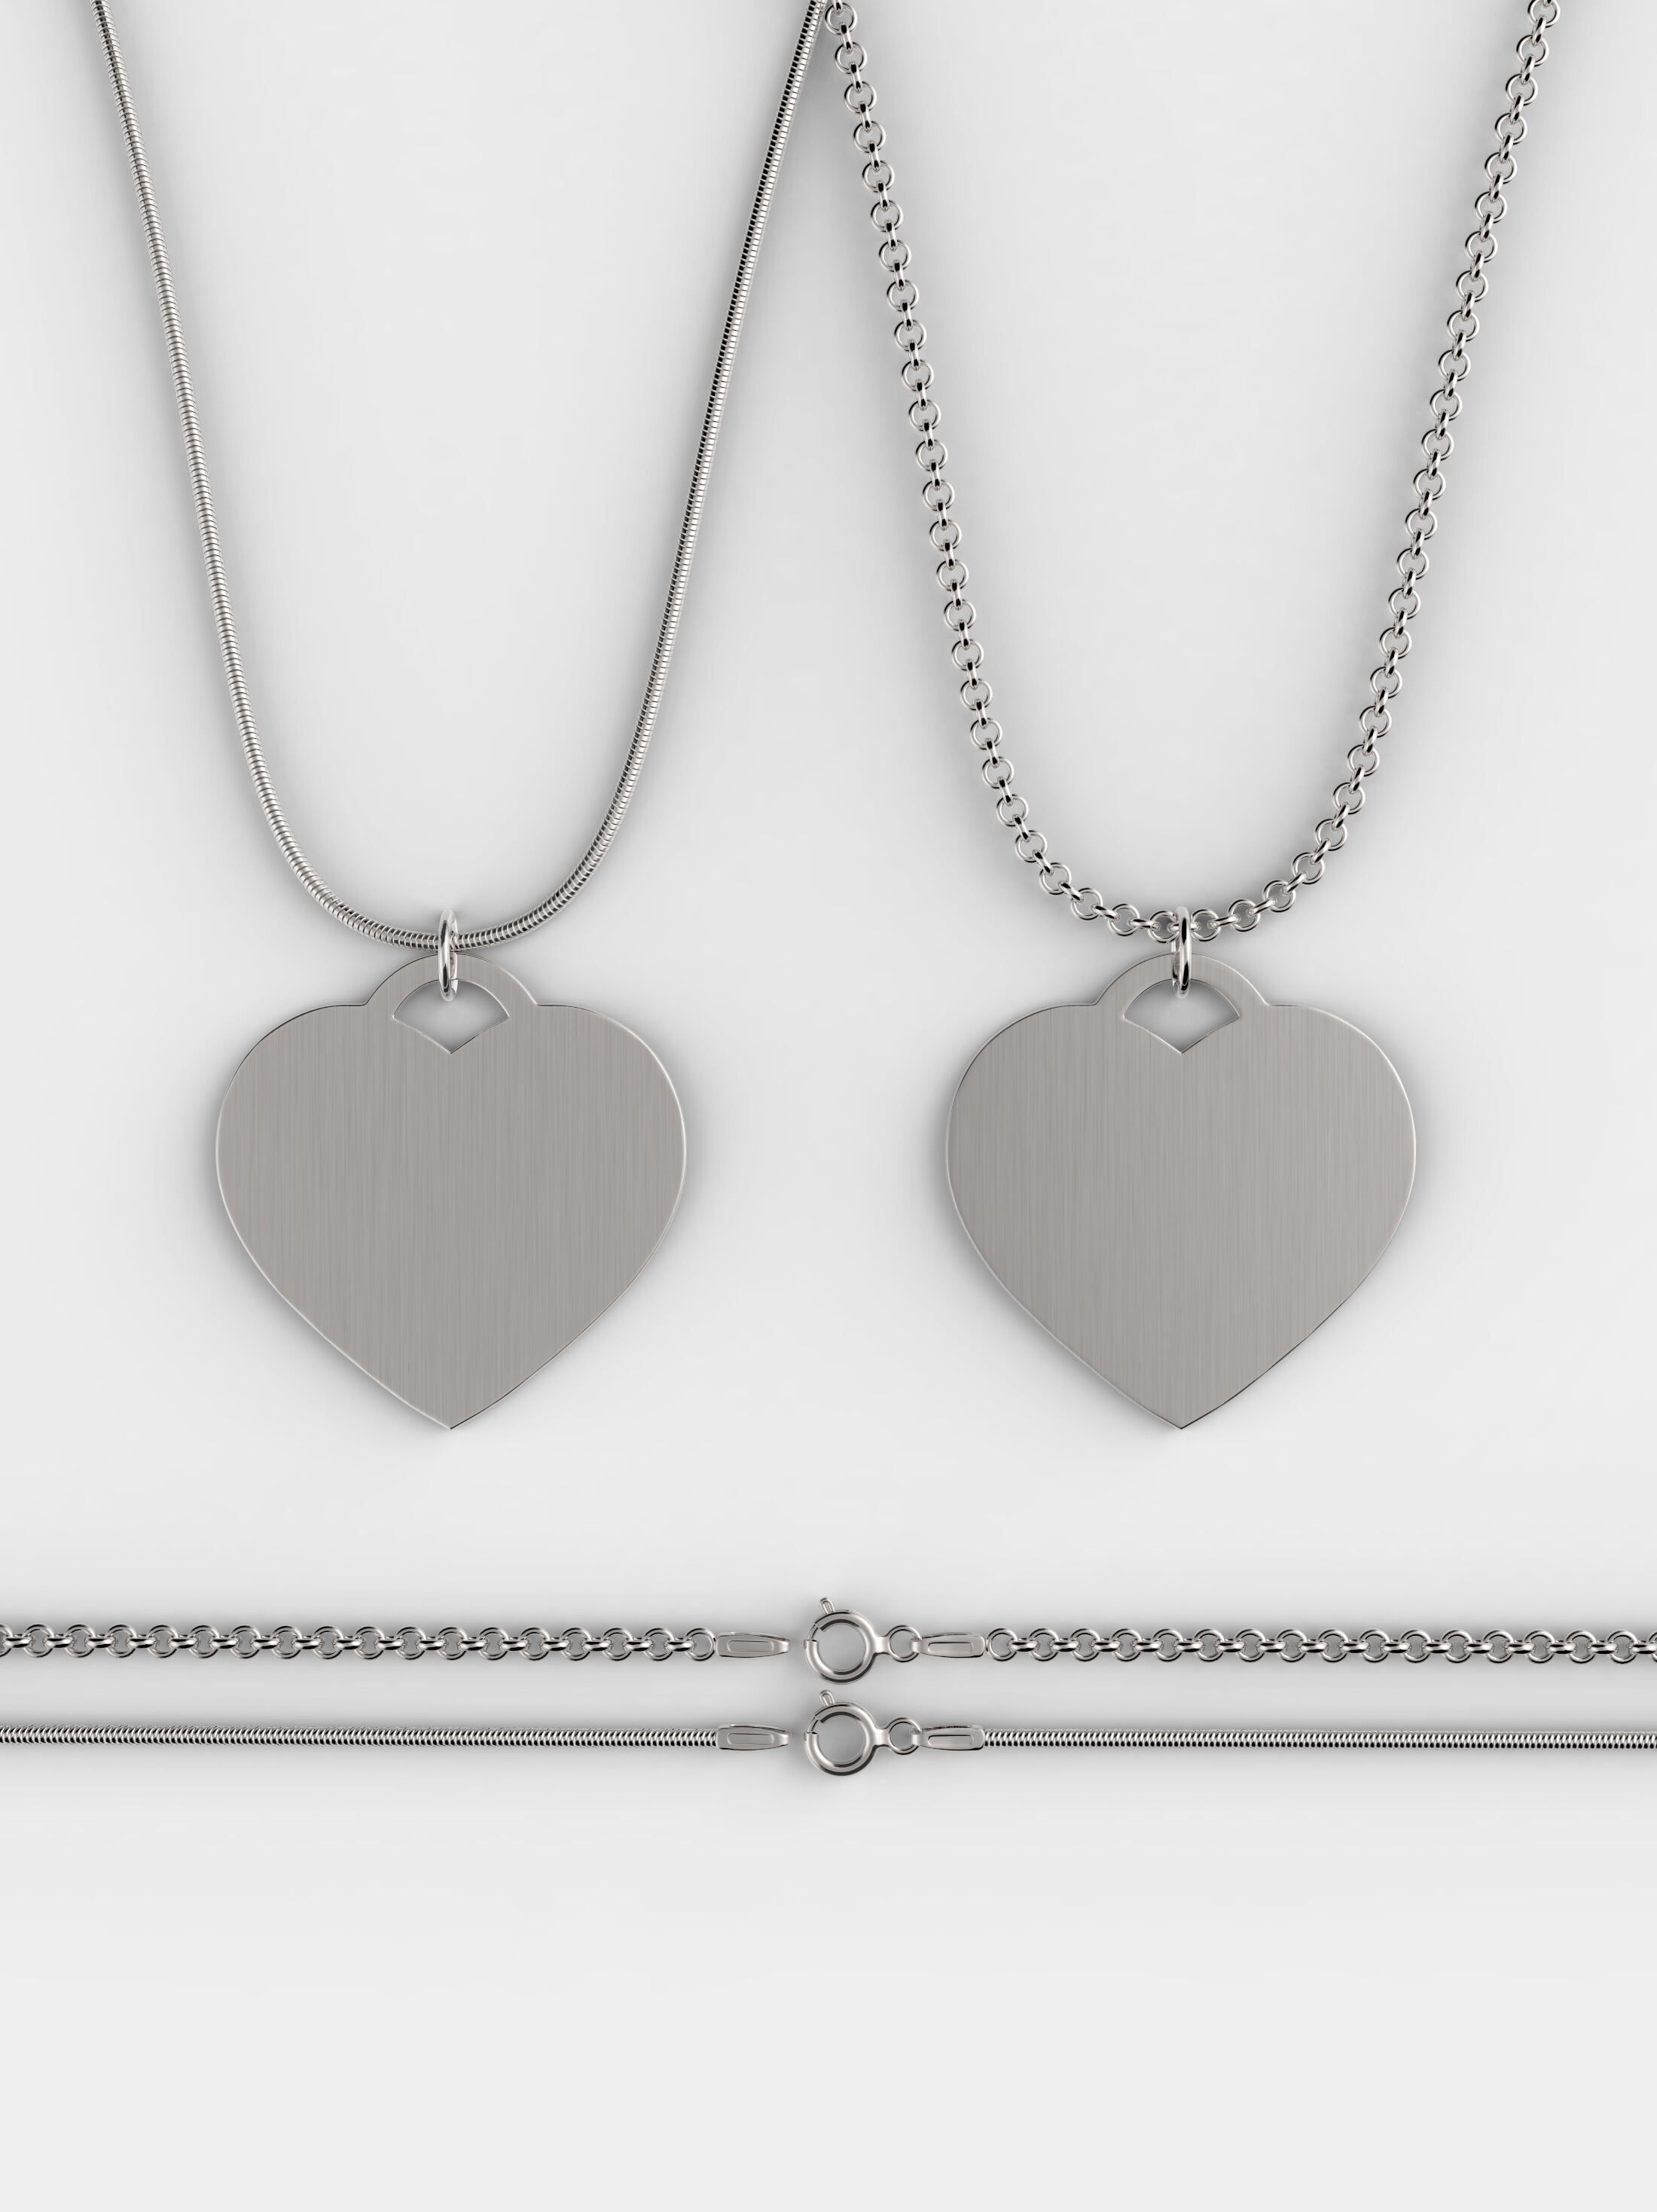 custom silver heart necklace options